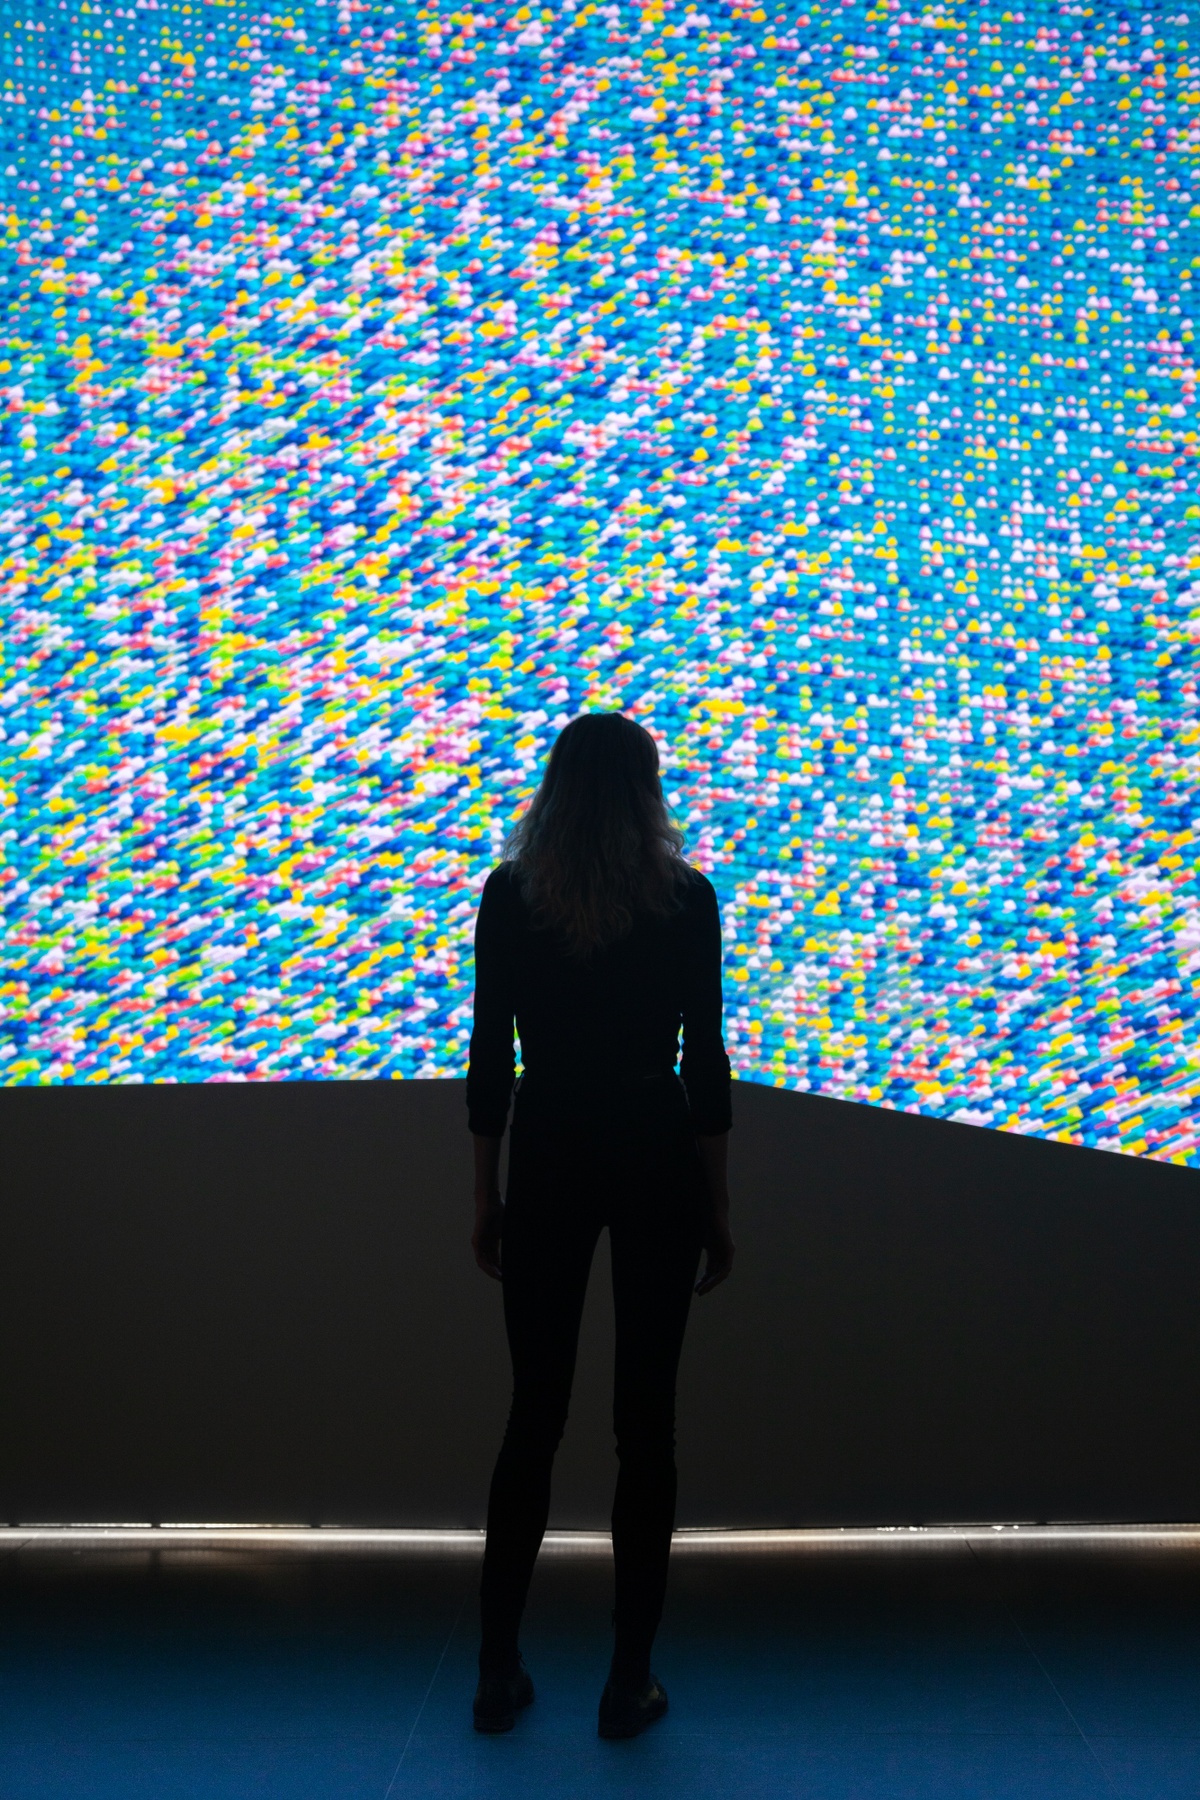 Woman silhouette against a large screen with data visualization graphics, in a blue dominant color palette